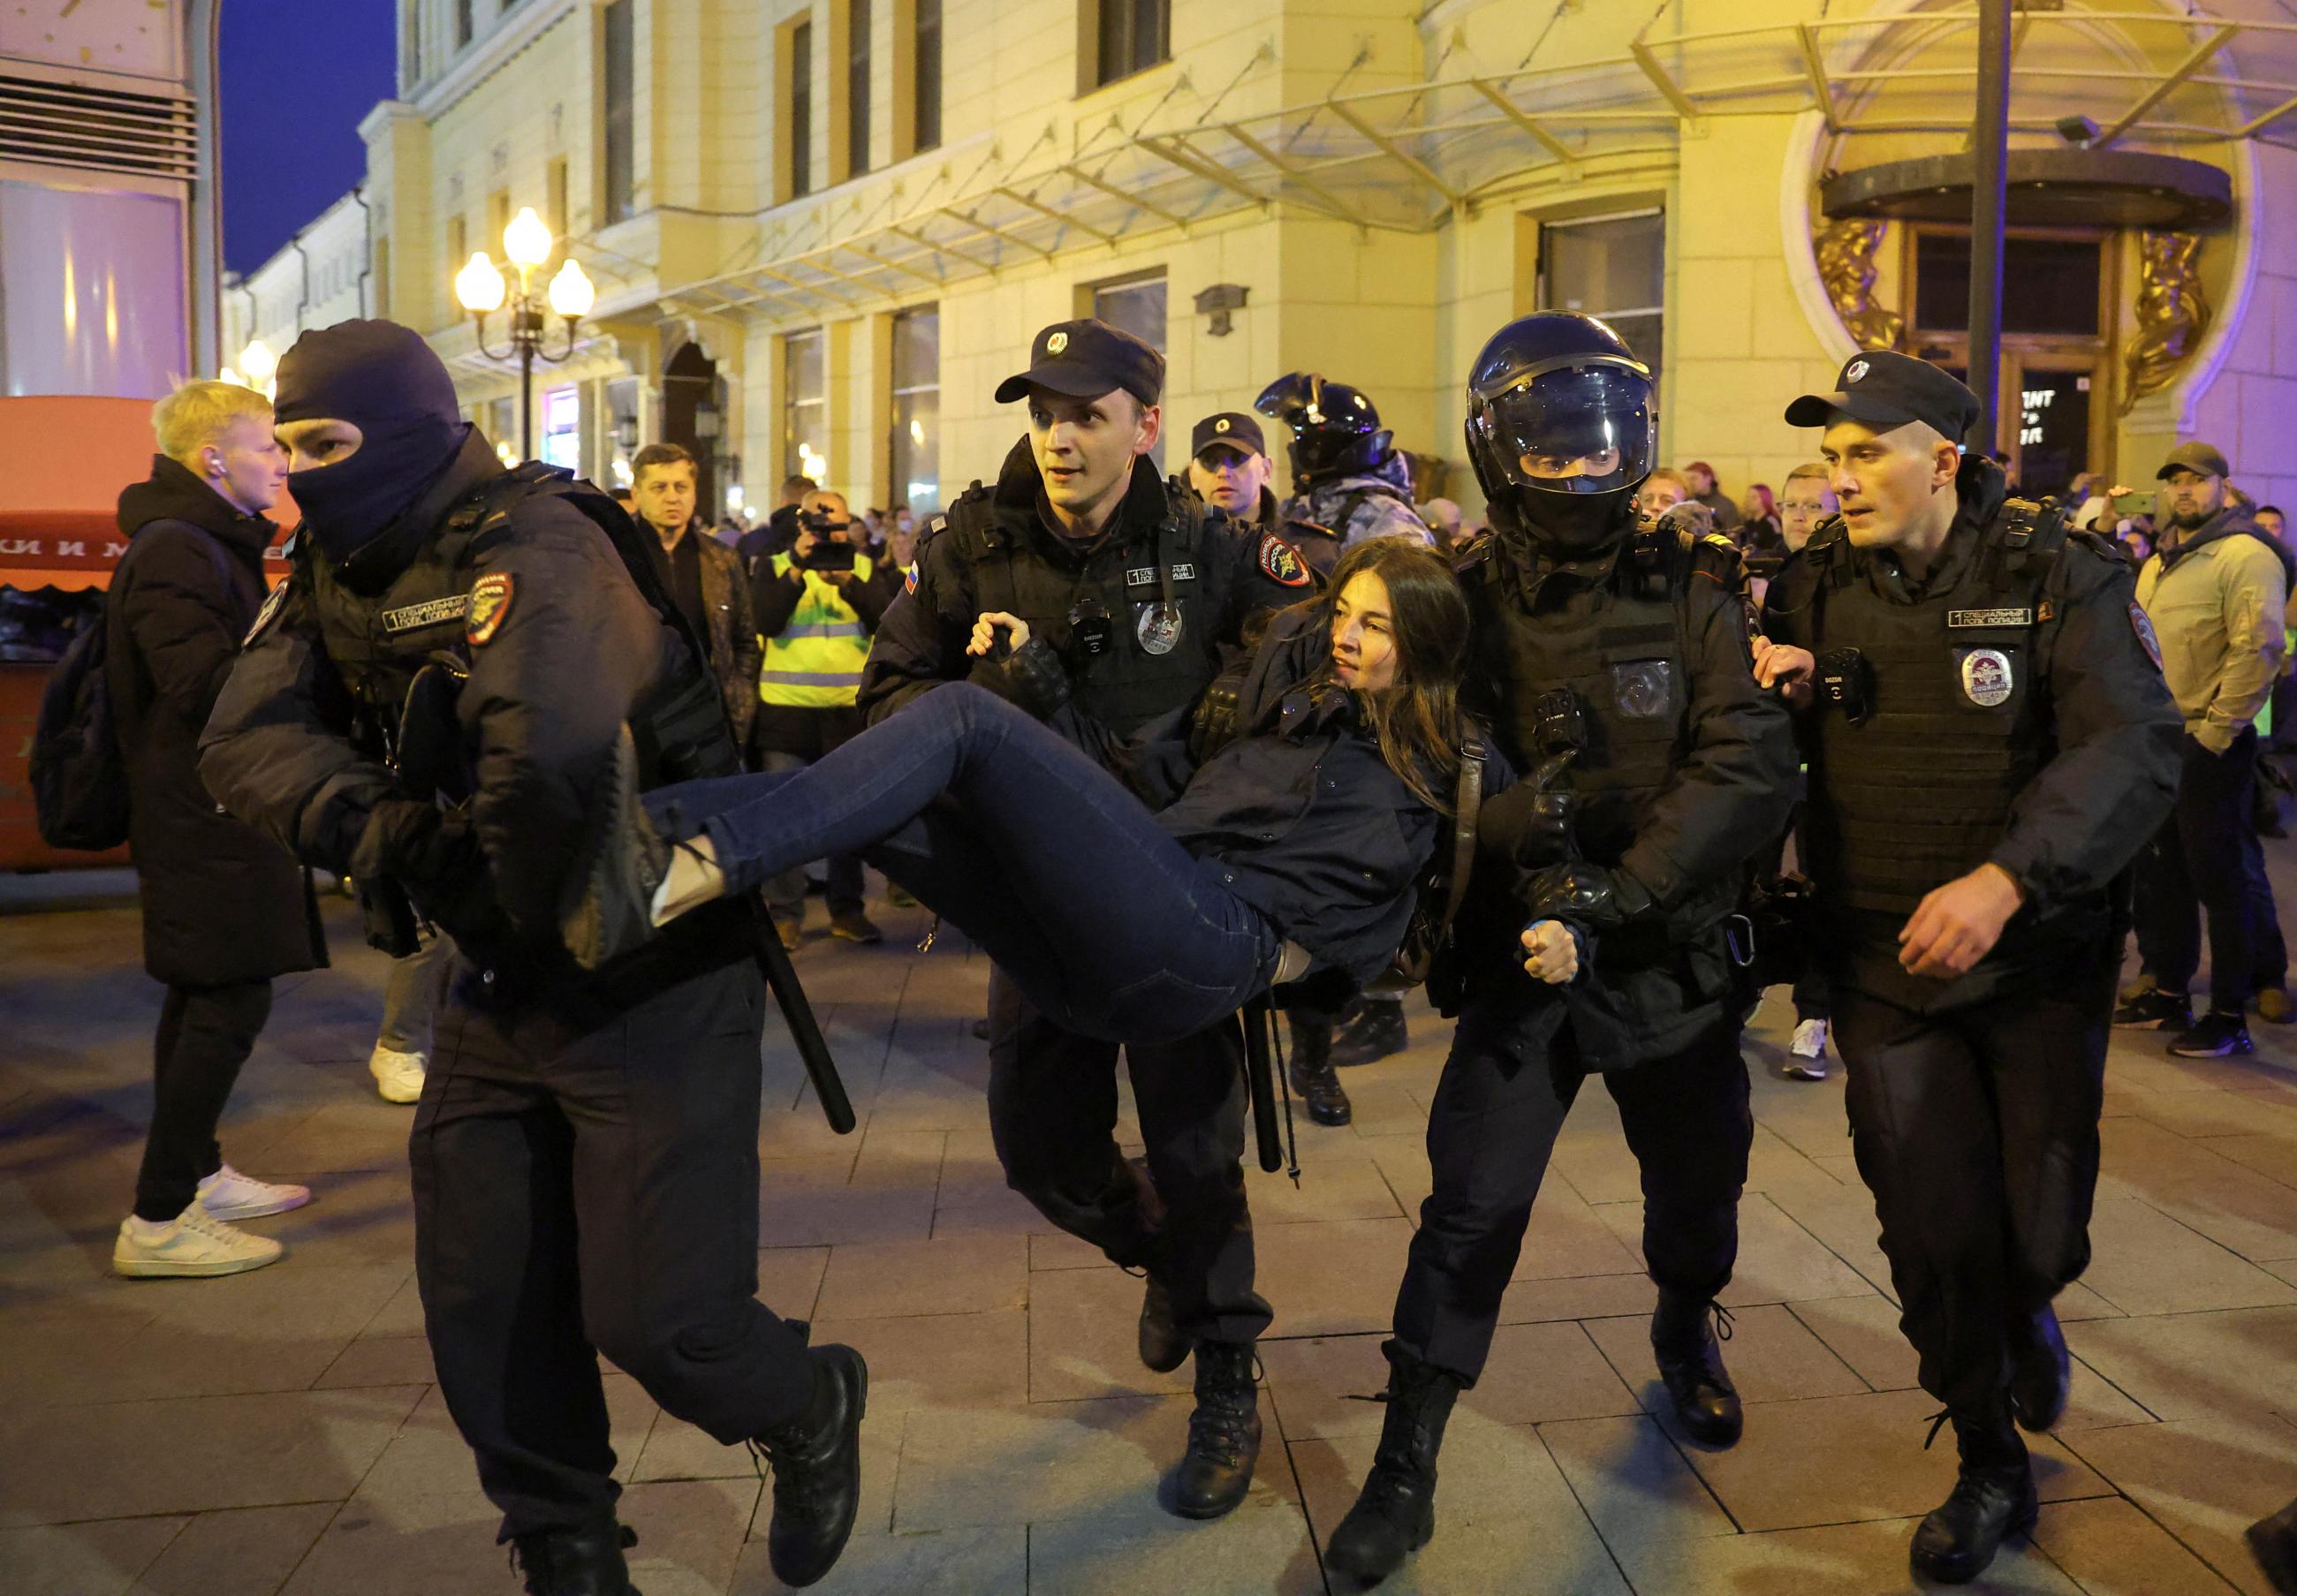 Russian police lift a young woman in the air by her arms and legs as she and others protest Putin's war in Ukraine and the Russian president's call to mobilize reservists in the armed forces, in in Moscow, Russia, on September 21, 2022. 